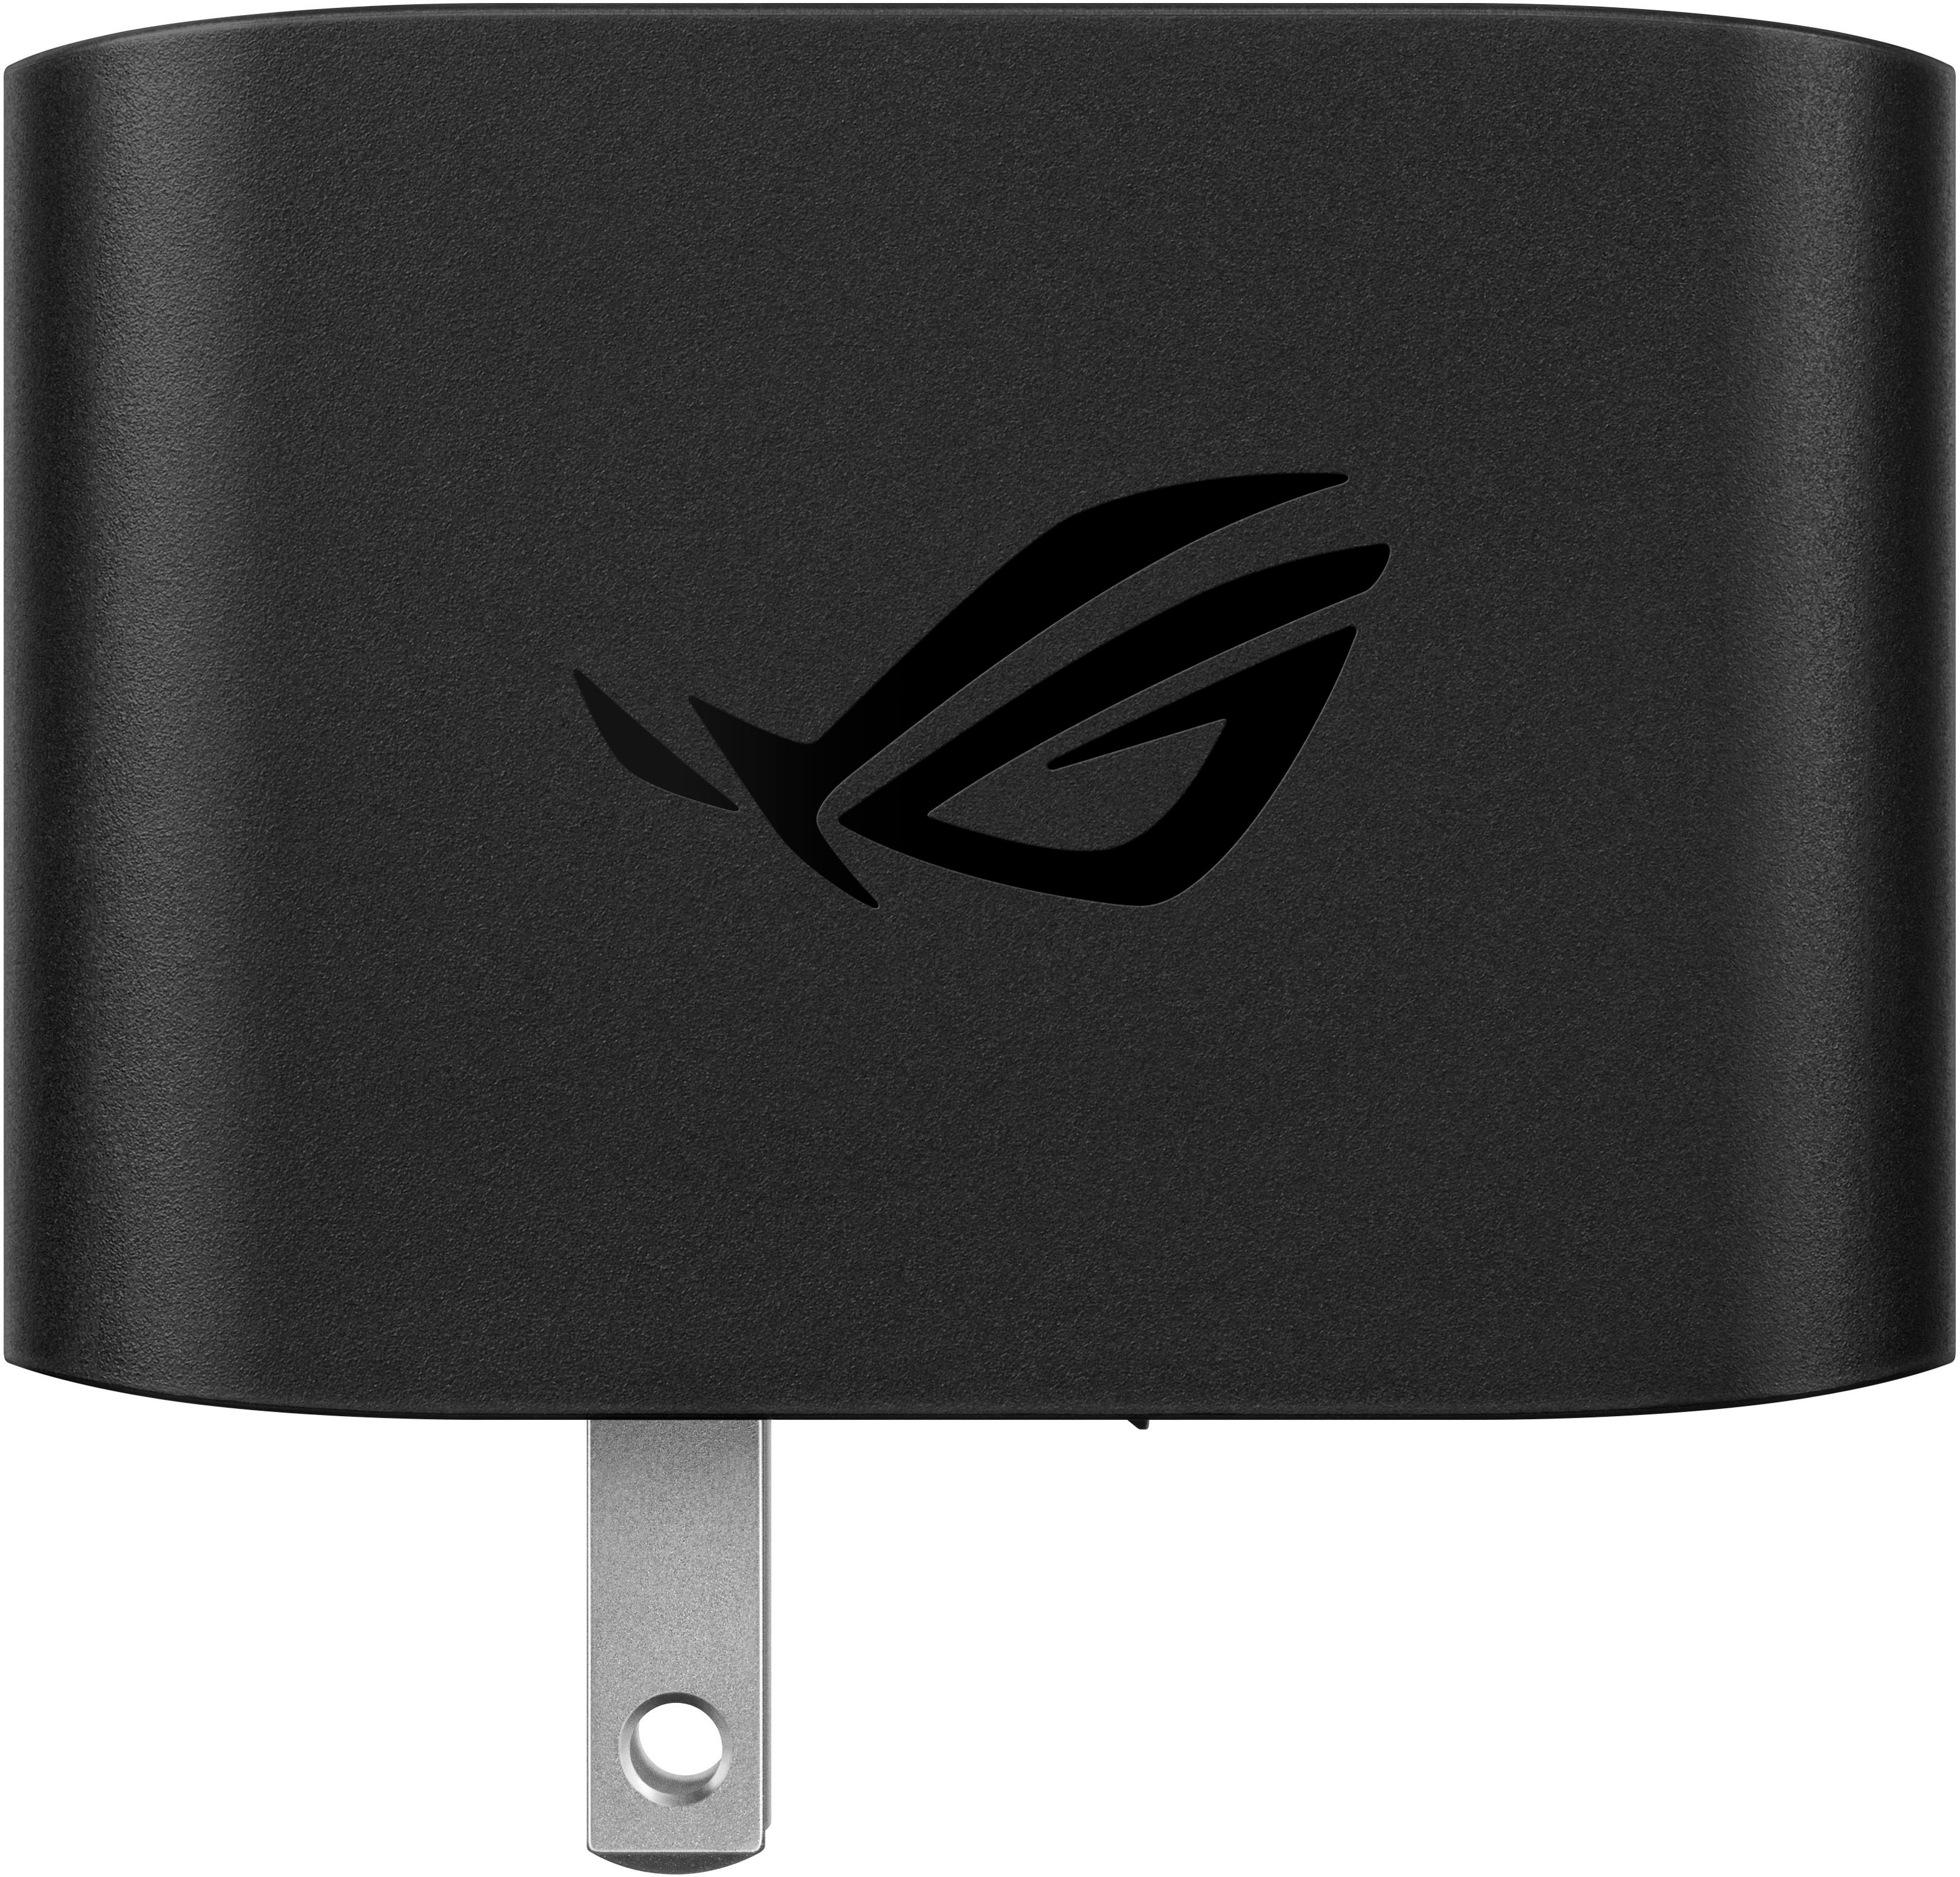 ROG Phone 30W Adapter & USB-C Cable, Accessoires et protections